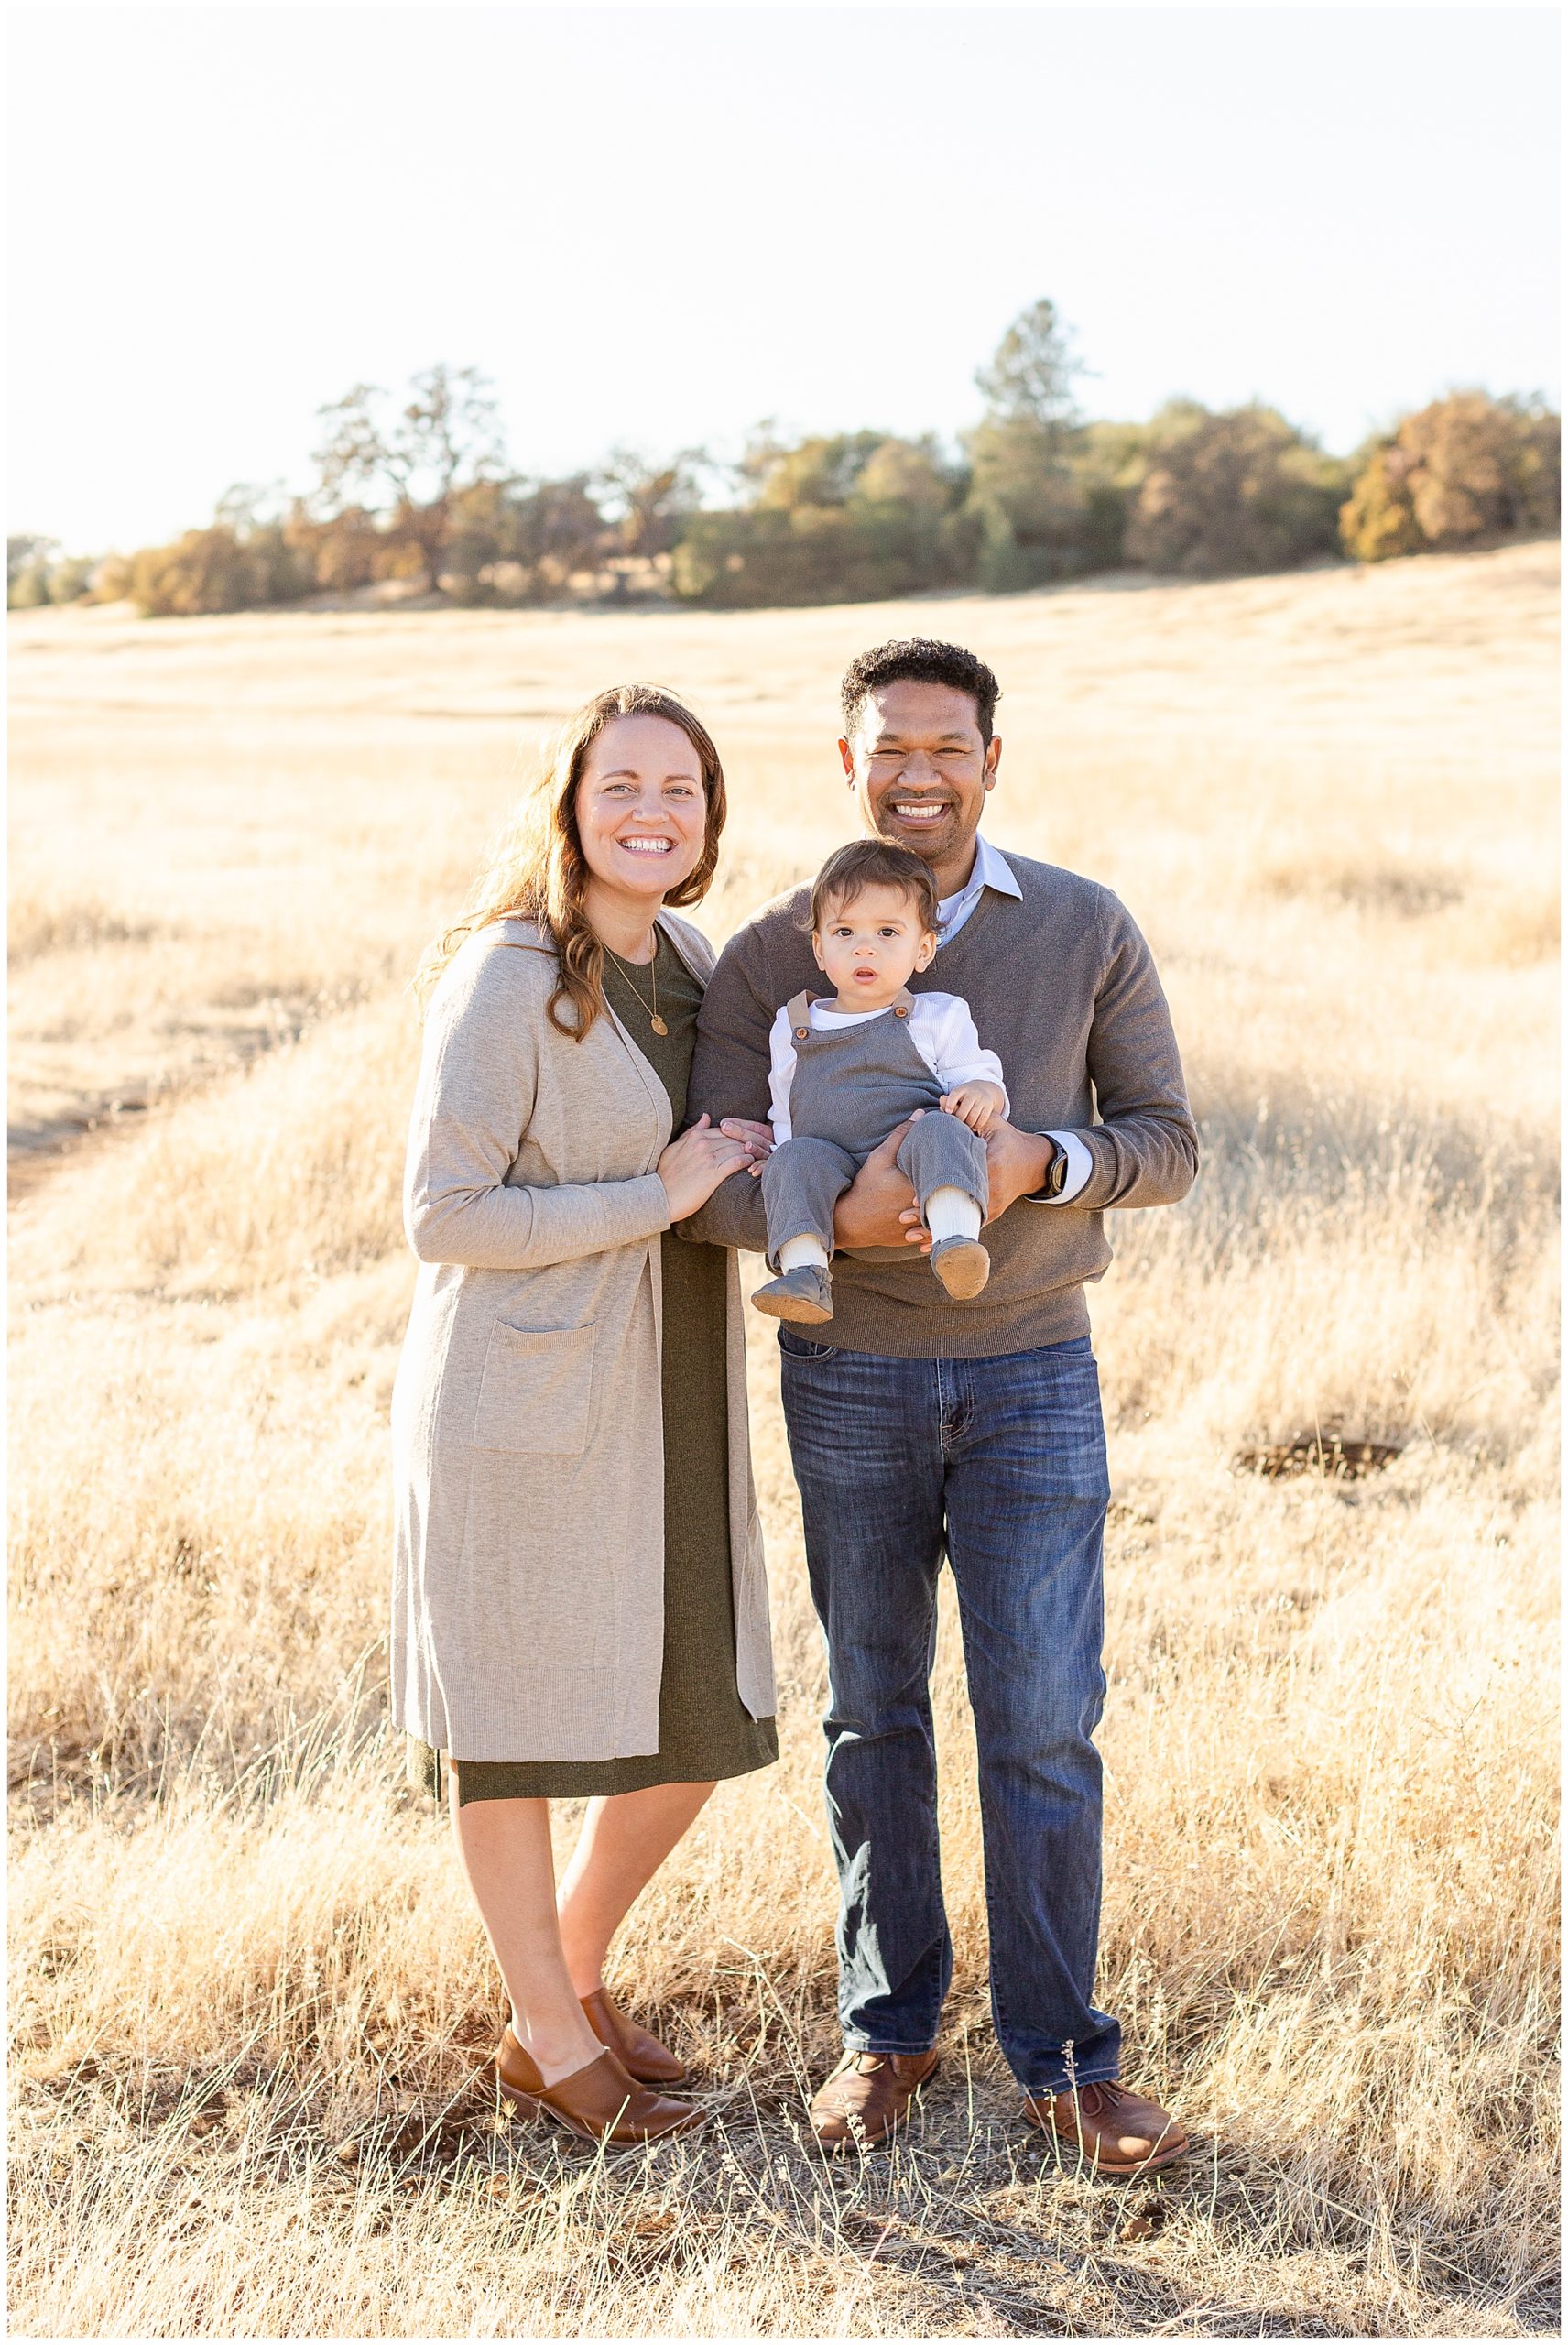 One Year Old Fall Family Portraits in Overalls | Holly + Zac